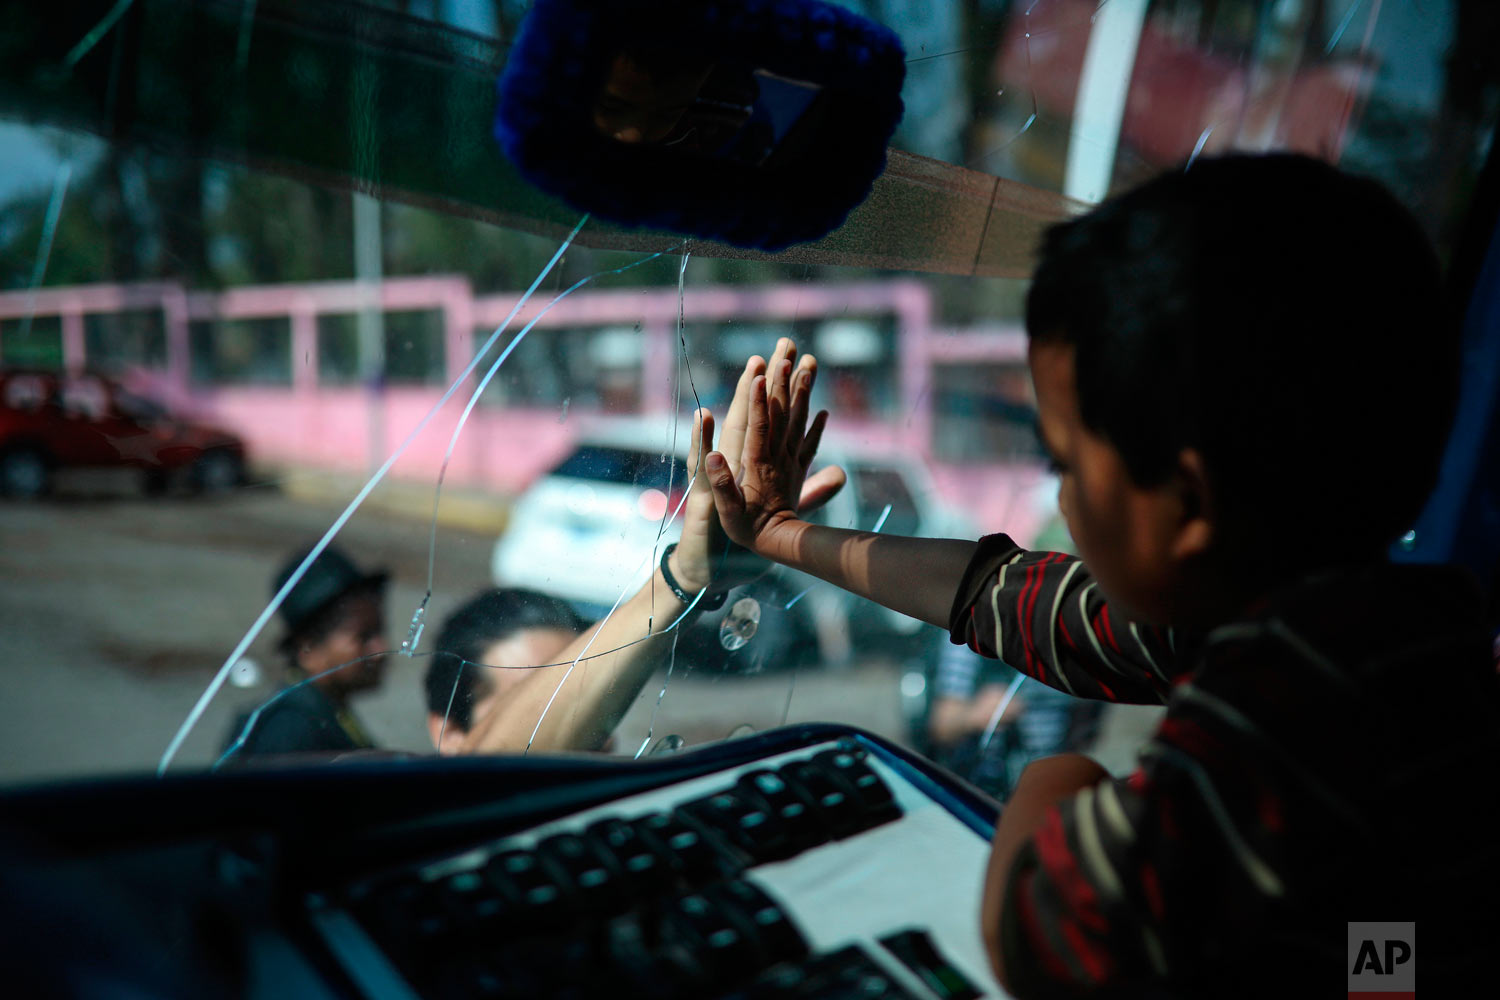  A boy says goodbye to a friend through the windshield of a bus that will carry him to Mexico City from the sports club where Central American migrants traveling with the annual "Stations of the Cross" caravan had been camping out in Matias Romero, Oaxaca State, Mexico, Thursday, April 5, 2018. Migrants in the caravan that drew criticism from U.S. President Donald Trump began packing up their meager possessions and boarding buses to the Mexican capital and the nearby city of Puebla. (AP Photo/Felix Marquez) 